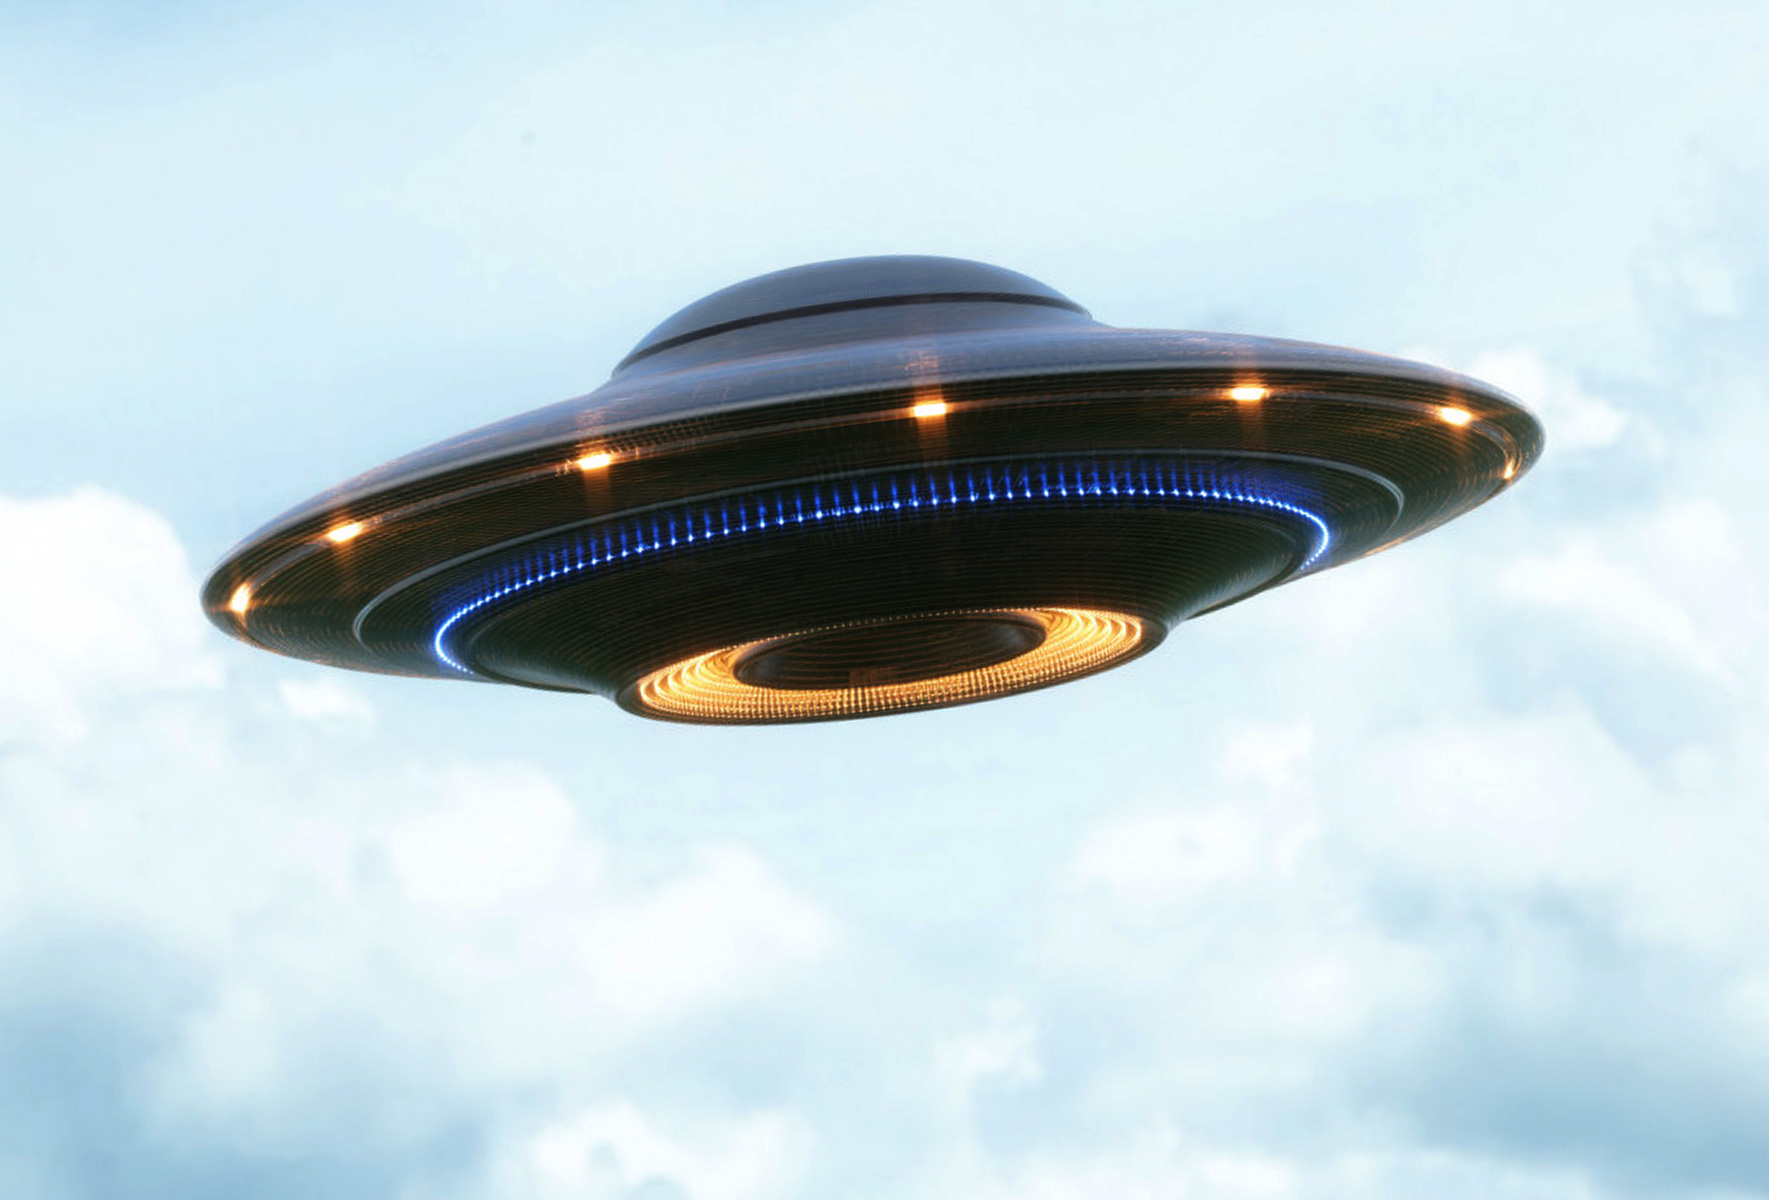 U.S. Has UFOs of 'Non-Human Origin', Ex-Intelligence Officer Claims